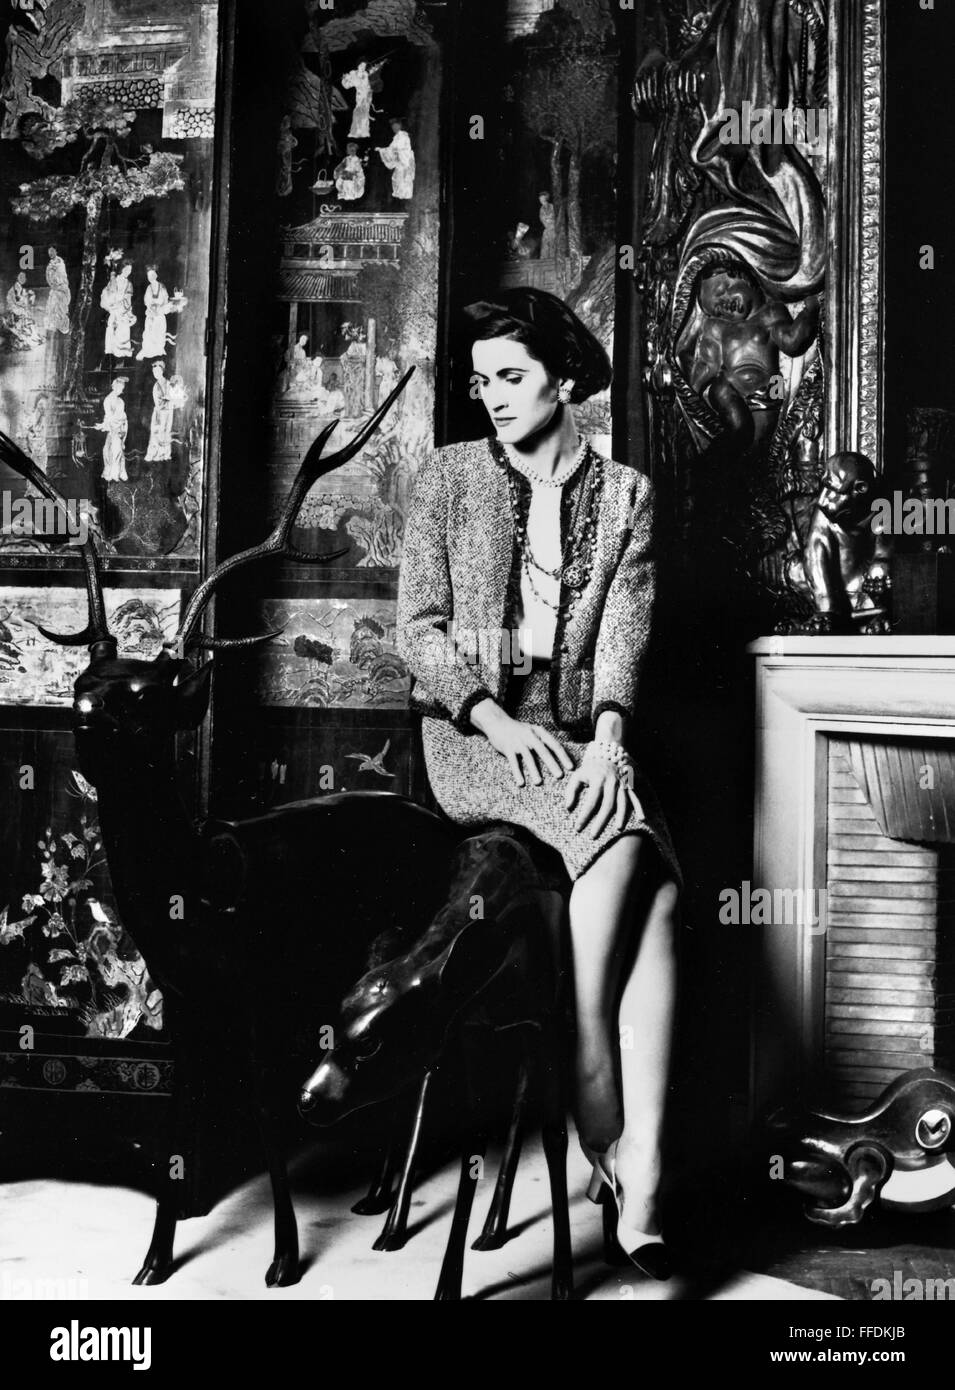 WOMEN'S FASHION, 1956. /nModel wearing a tweed suit designed by Coco Chanel,  1956. Photographed in Chanel's suite at the Ritz Hotel in Paris Stock Photo  - Alamy